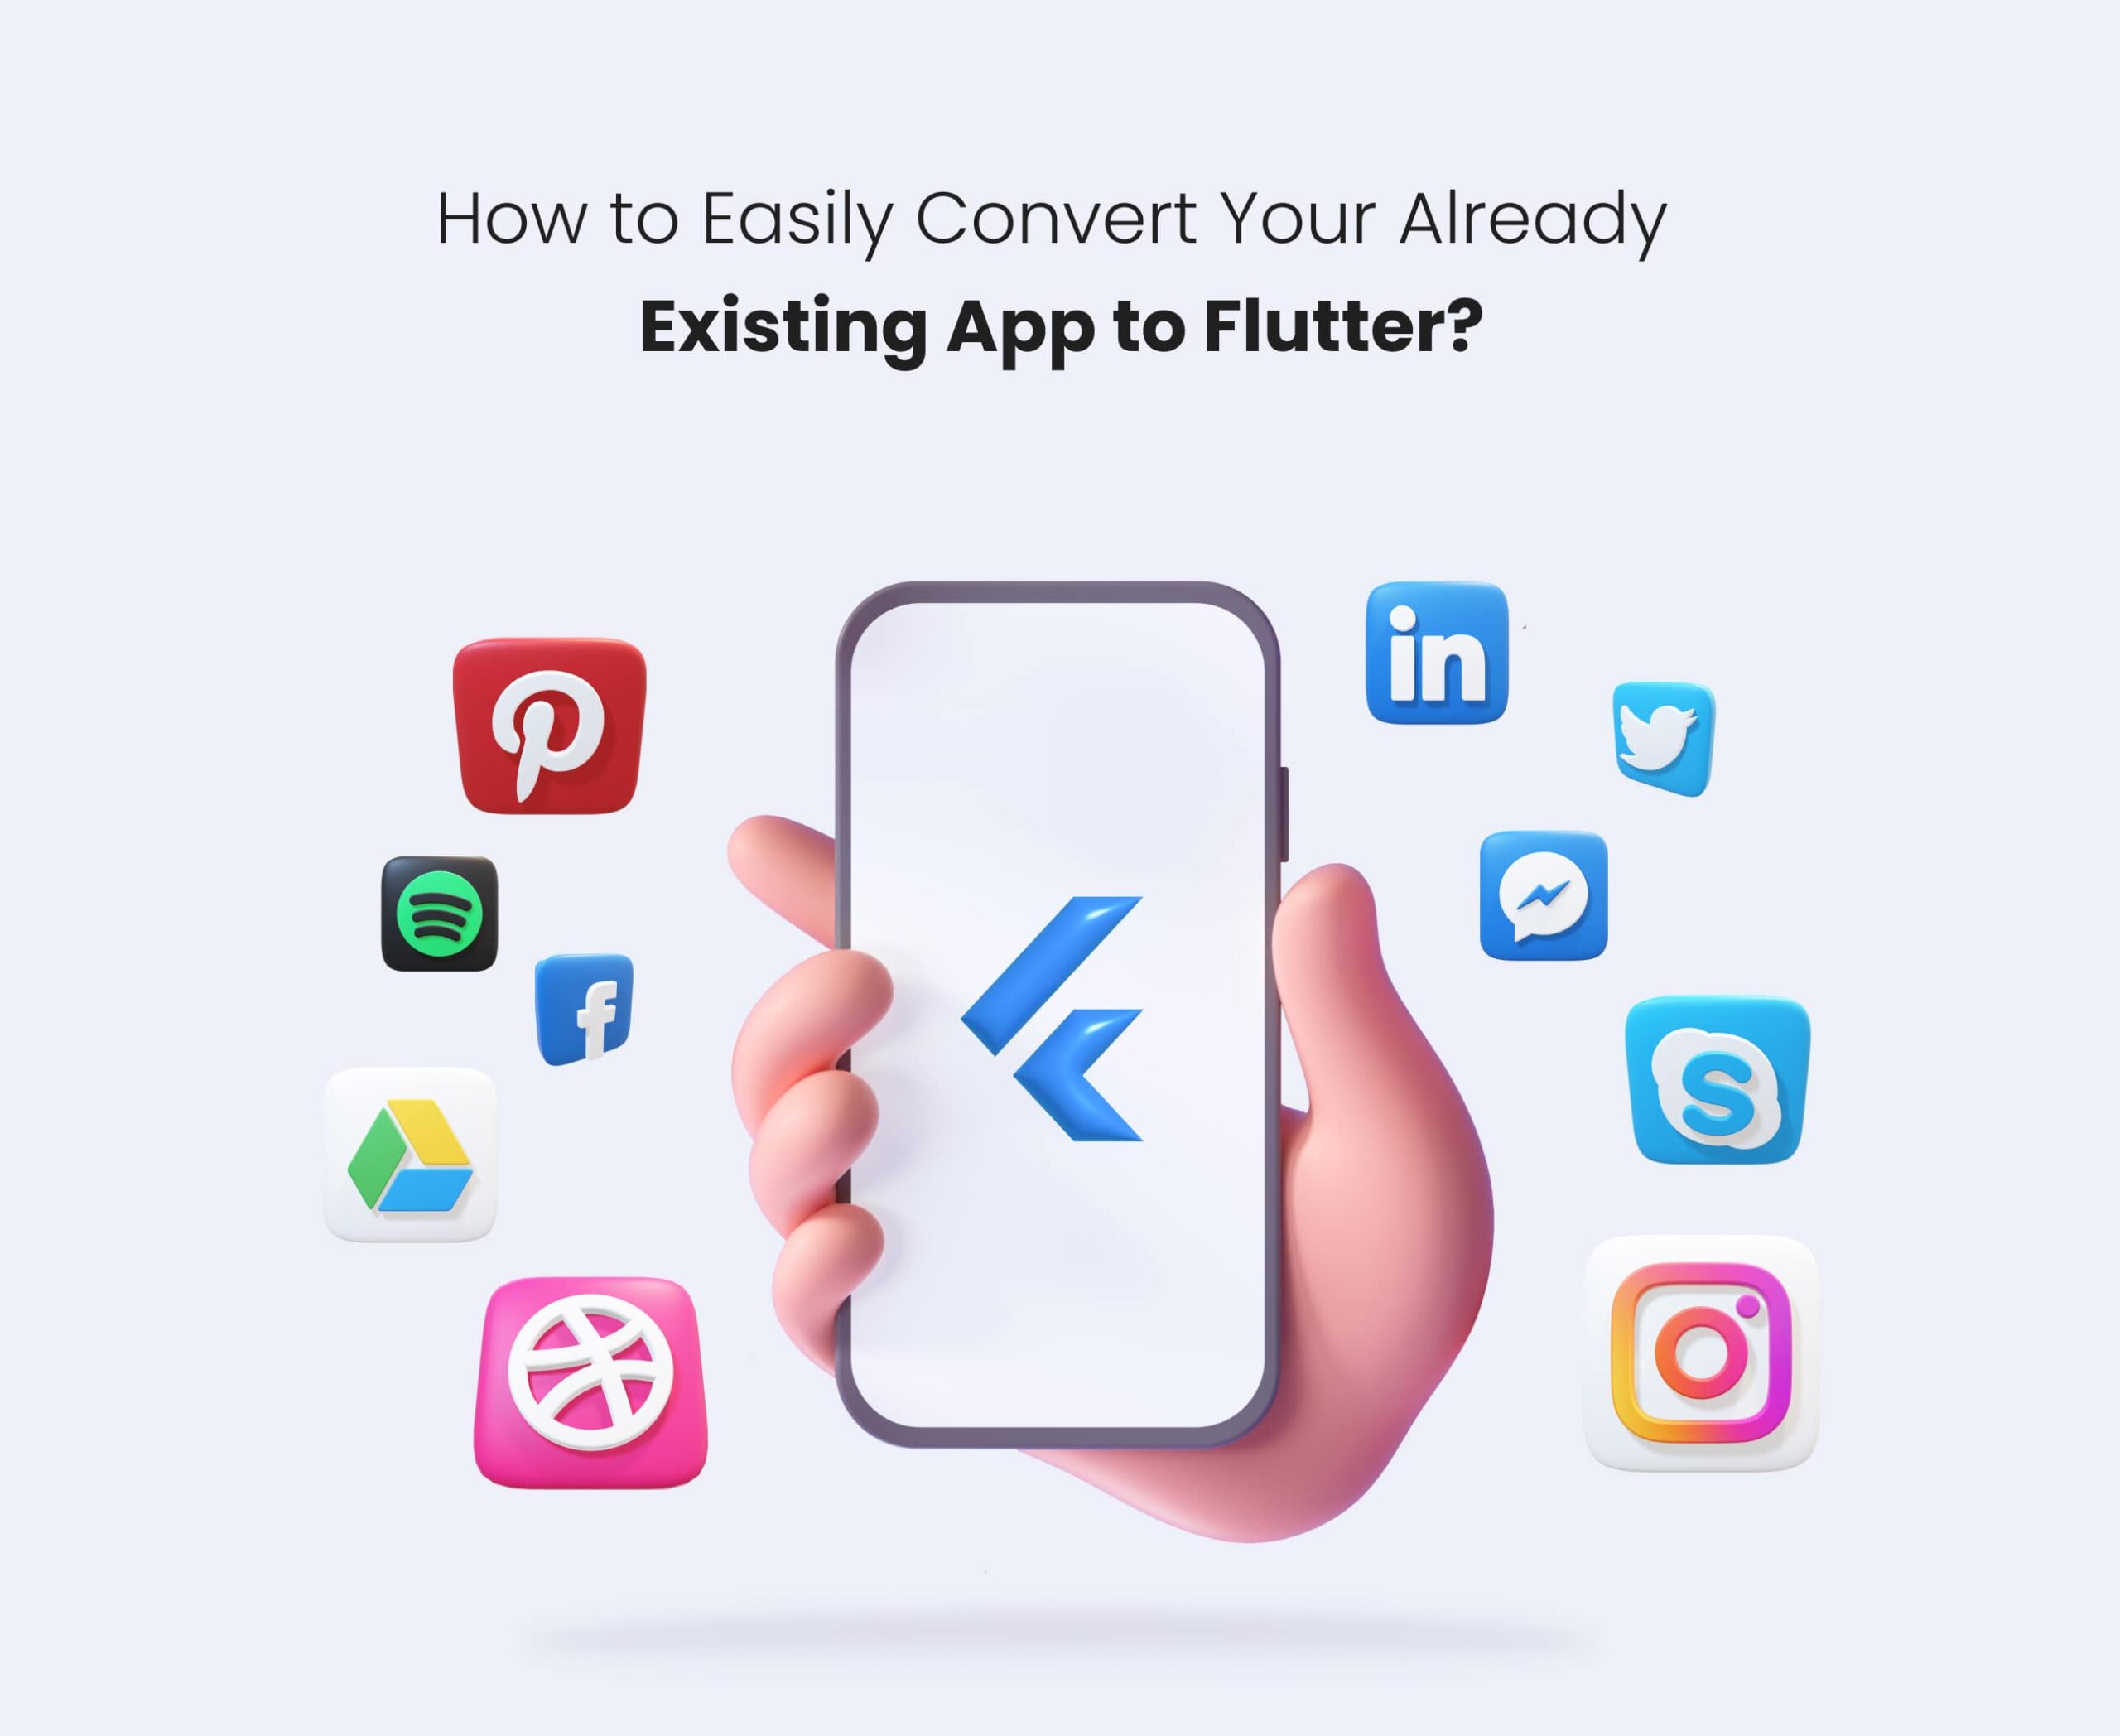 How to convert your existing app to Flutter?